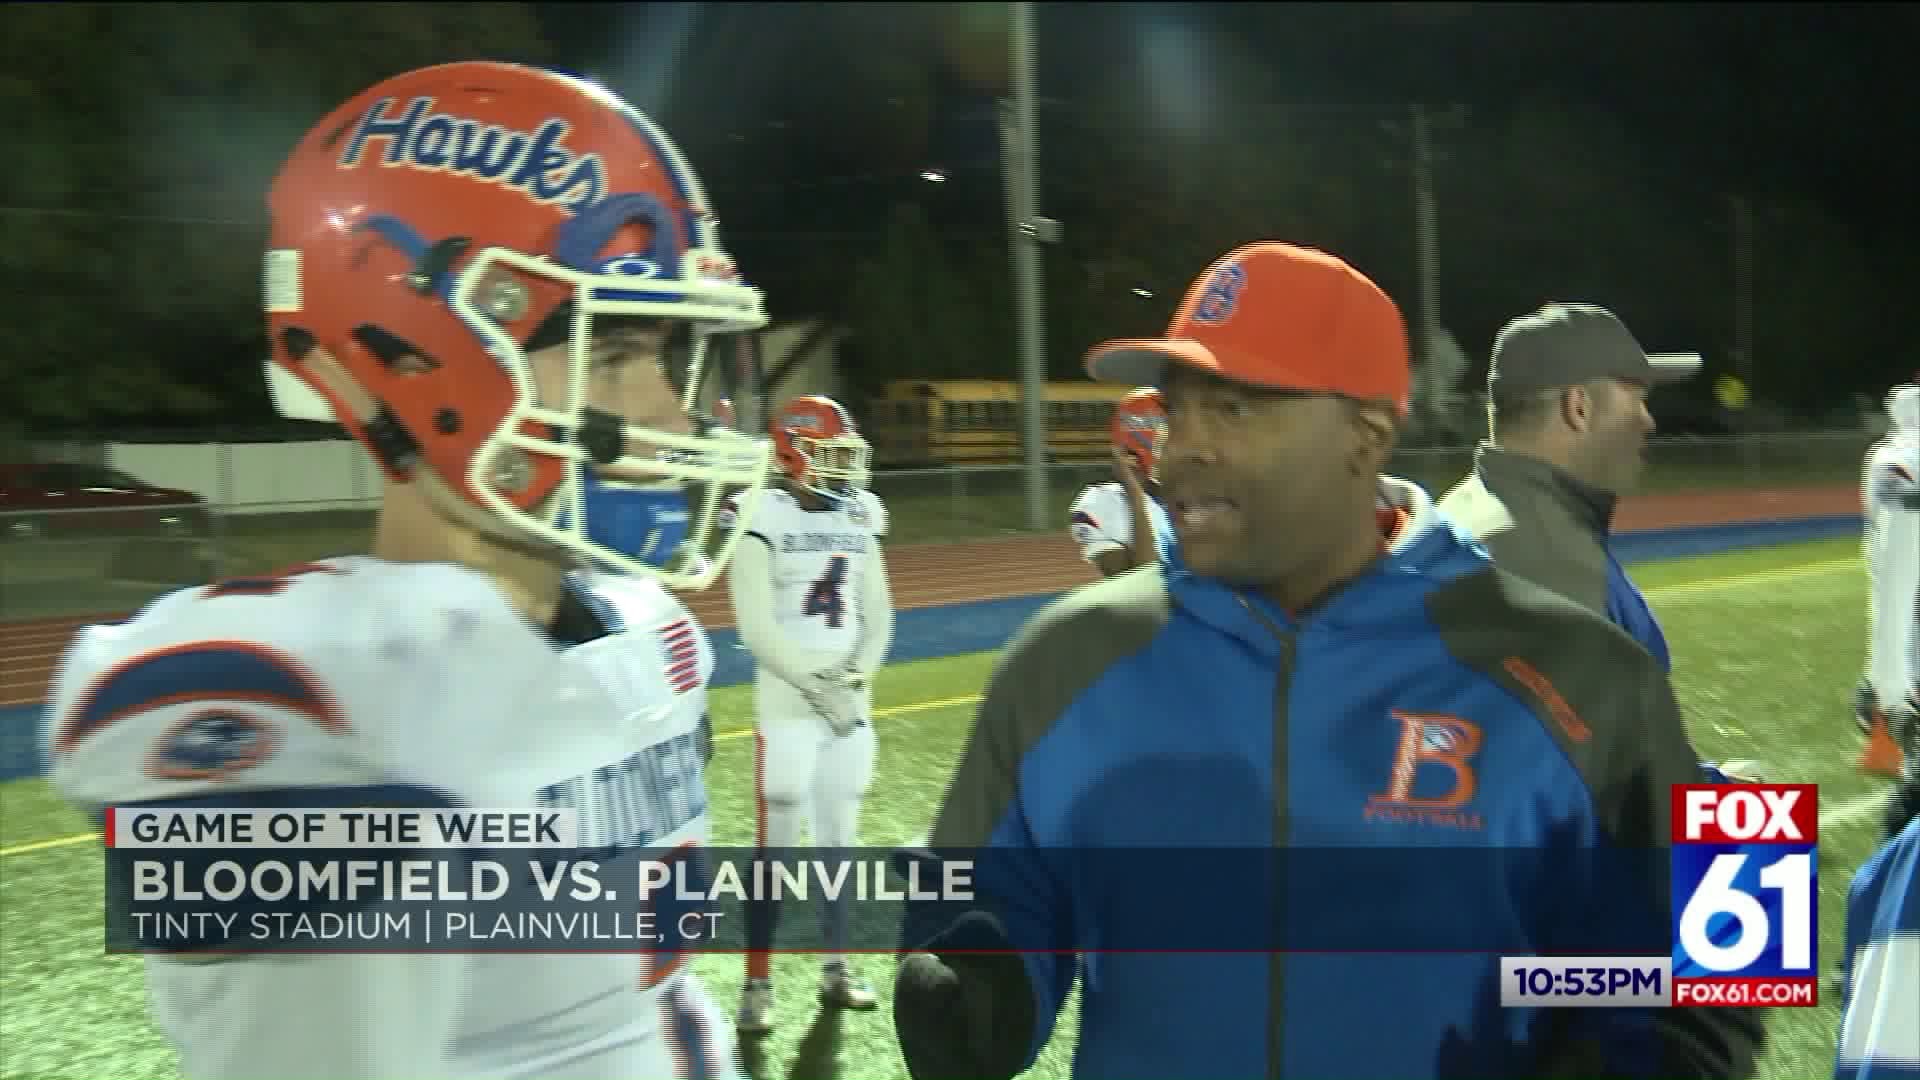 Game of the Week Bloomfield at Plainville